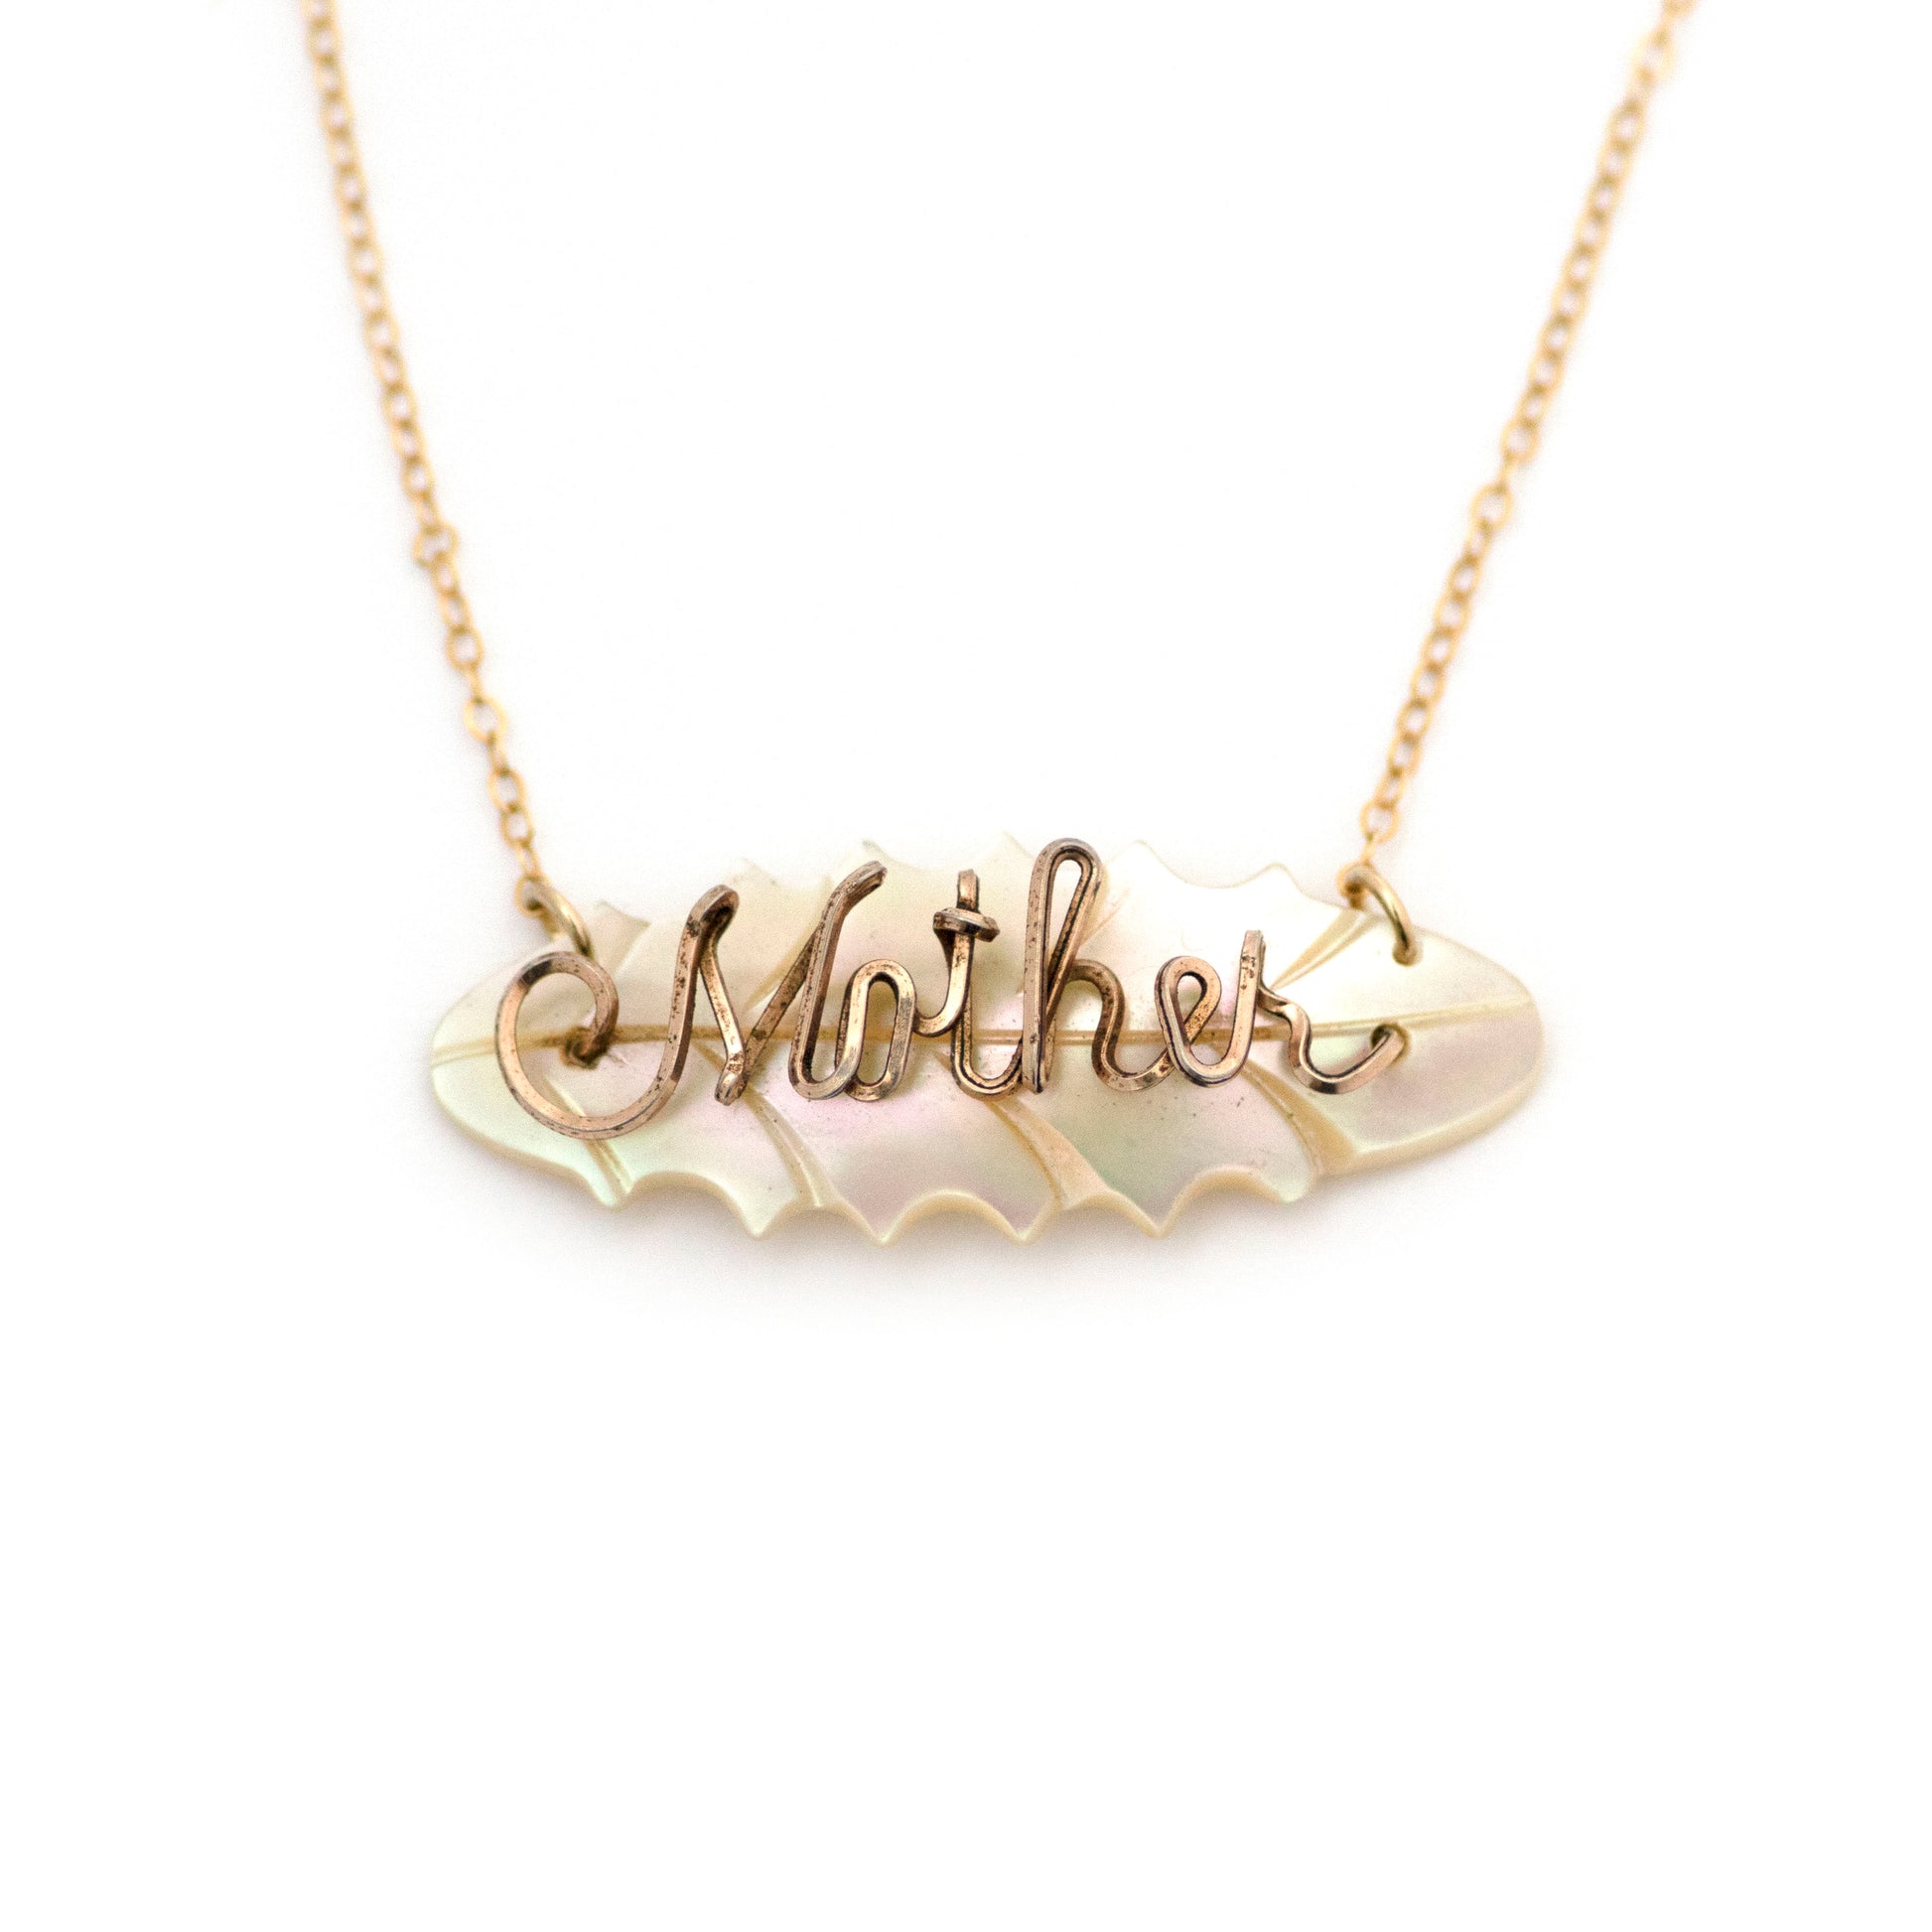 mid century from the 1960s leaf shape mother of pearl pendant with gold filled wire script spelling "Mother" brooch conversion necklace. Pendant is on a split gold filled chain. Necklace is on an all white background.